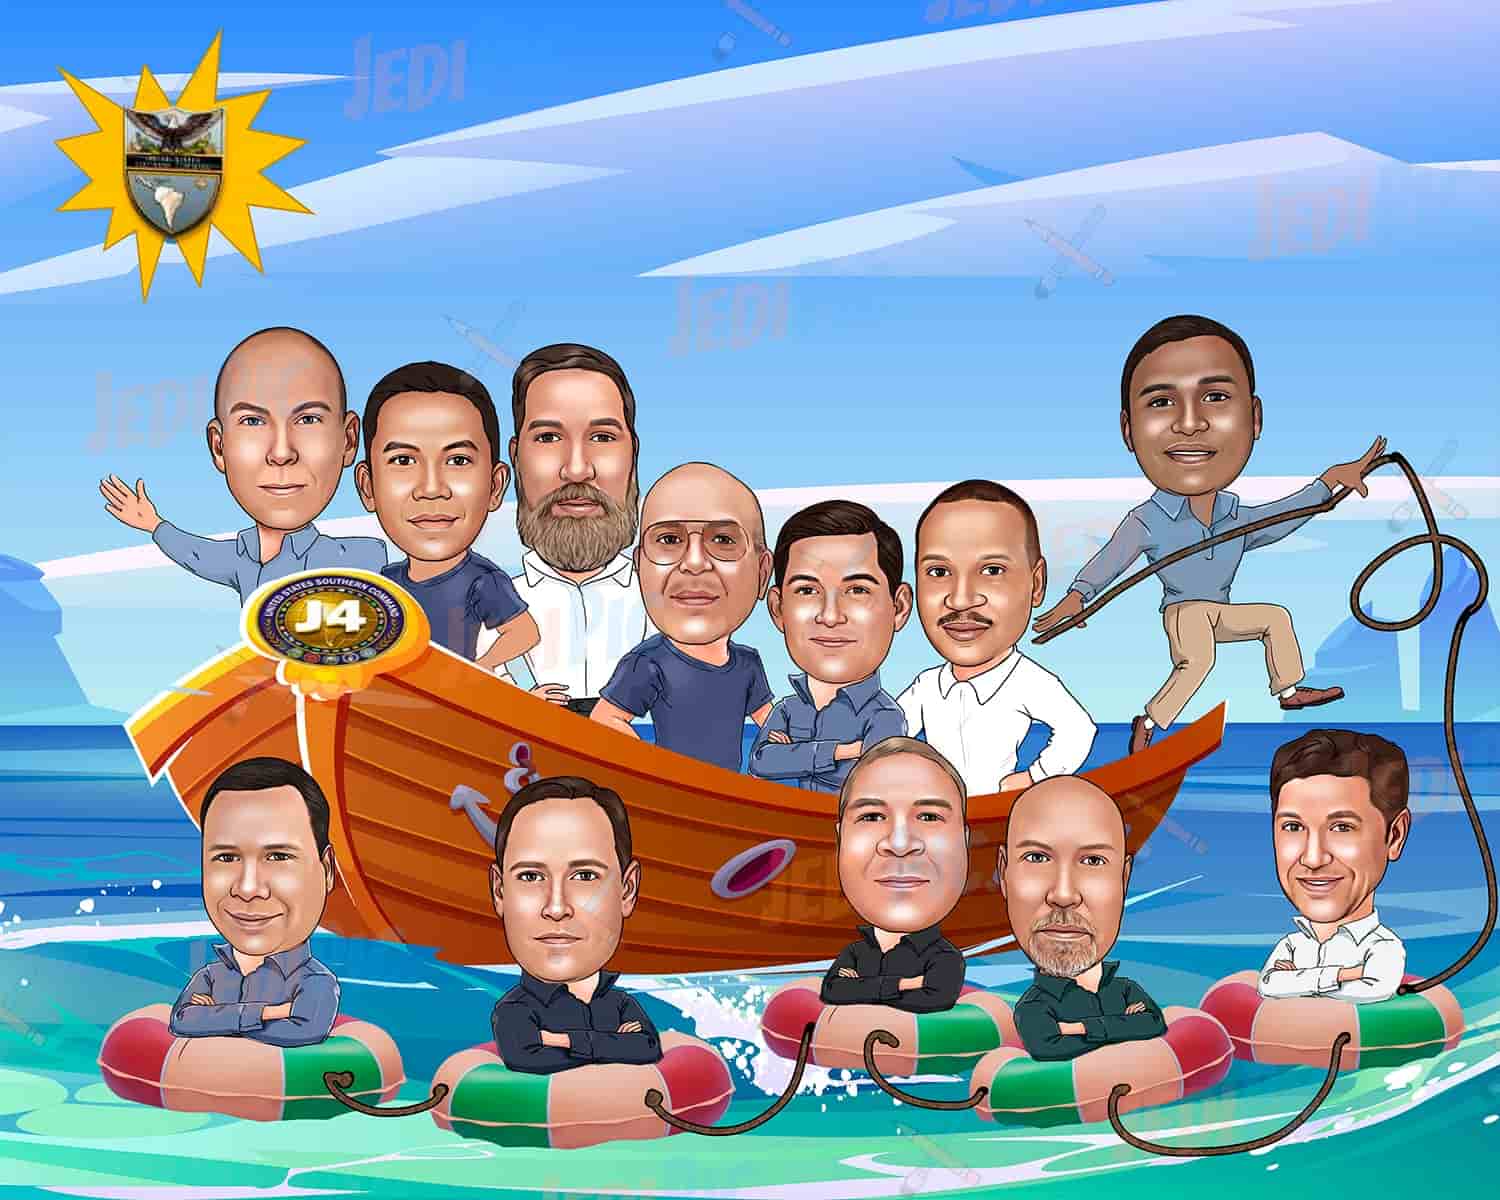 Team on Boat Cartoon Caricature Gift for Colleagues